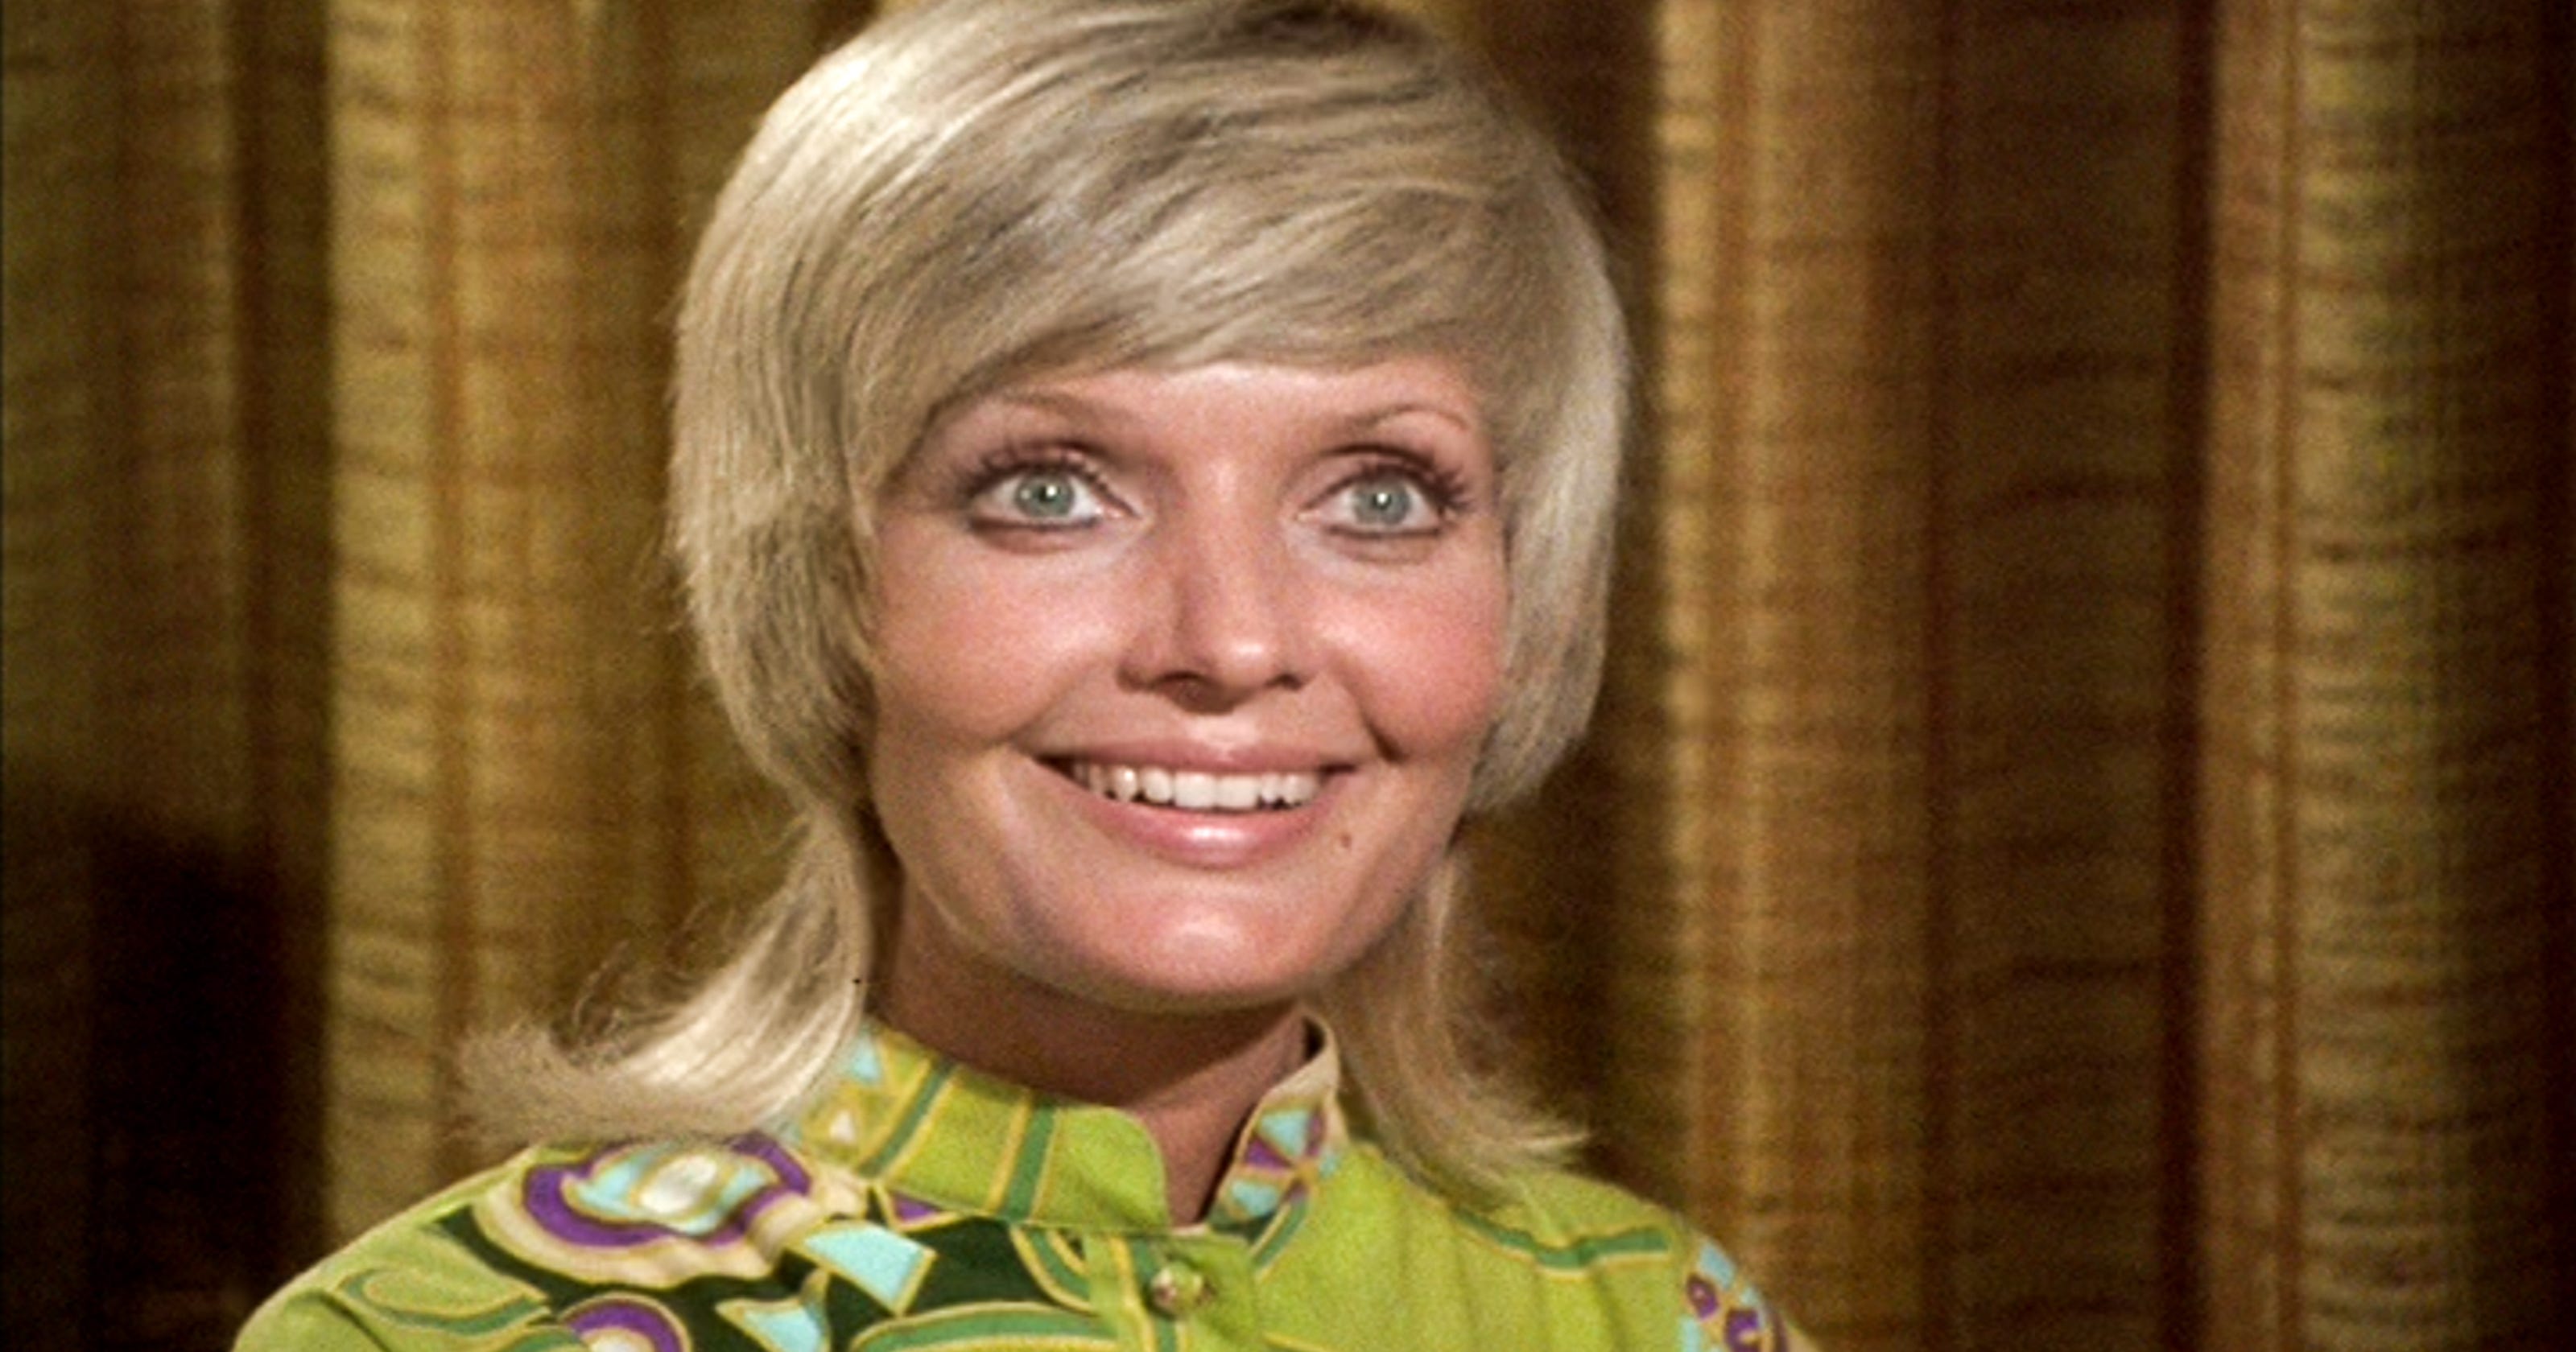 What We All Need Right Now The Fabulous Facial Expressions Of Carol Brady